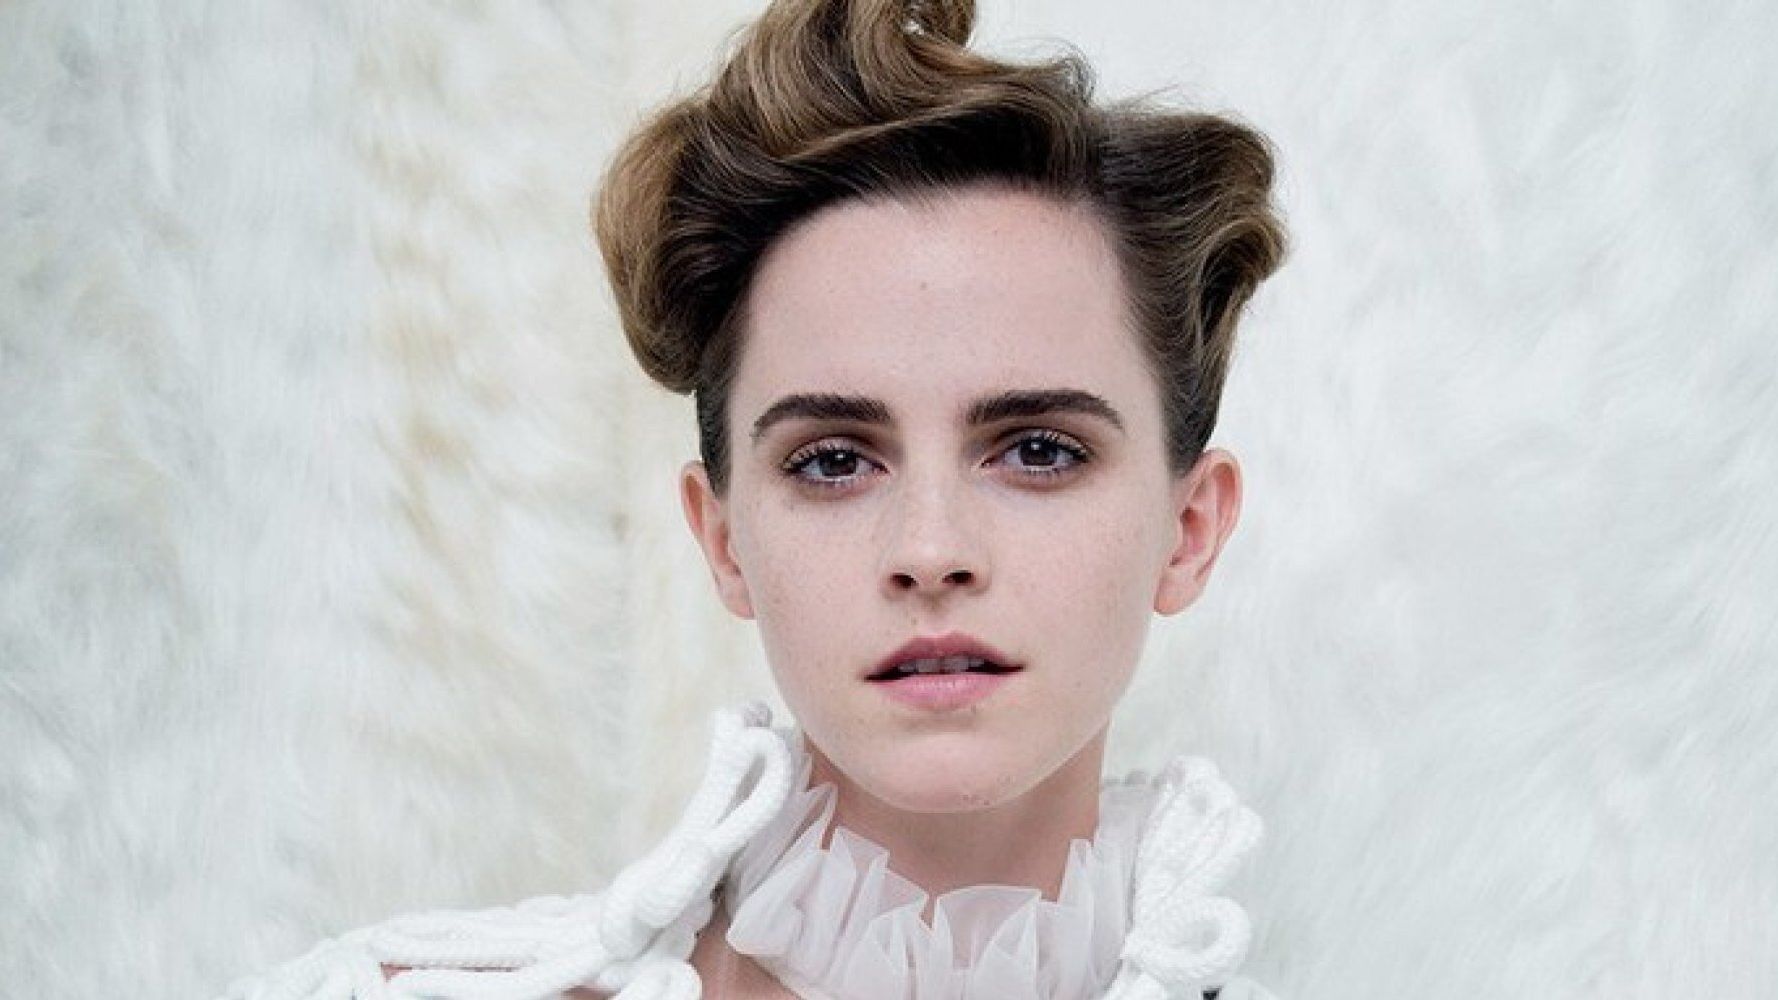 People Are Saying Emma Watson Is A Bad Feminist For Posing Braless In Photoshoot Huffpost News